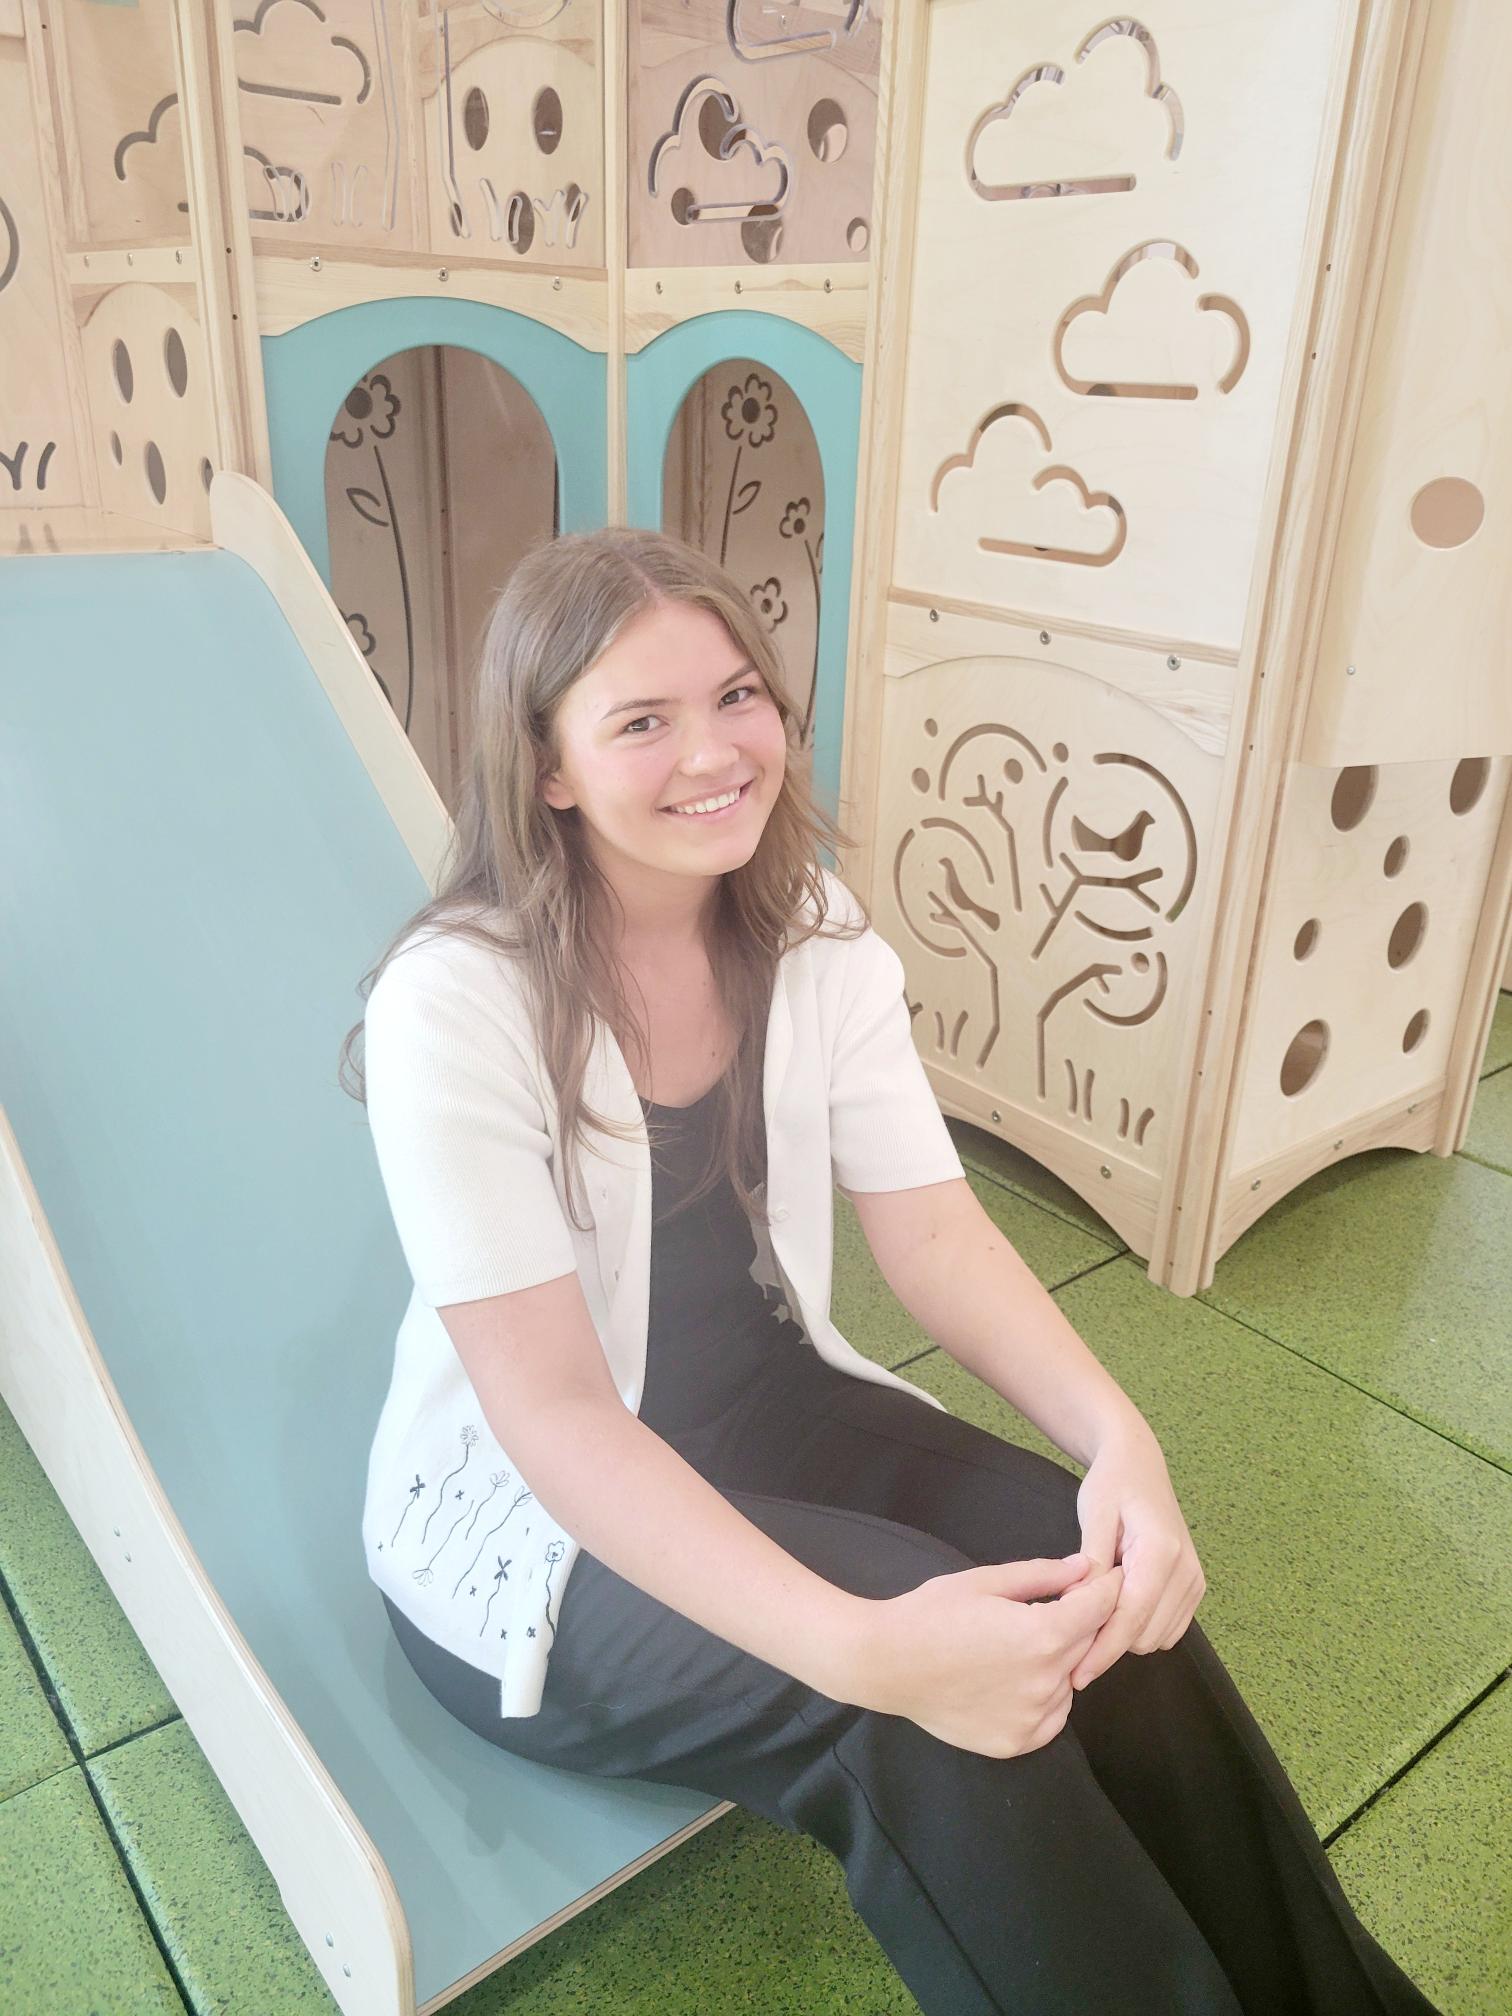 Anna wearing a white sweater over a black tank top and black pants sitting on the slide of a large wooden jungle gym